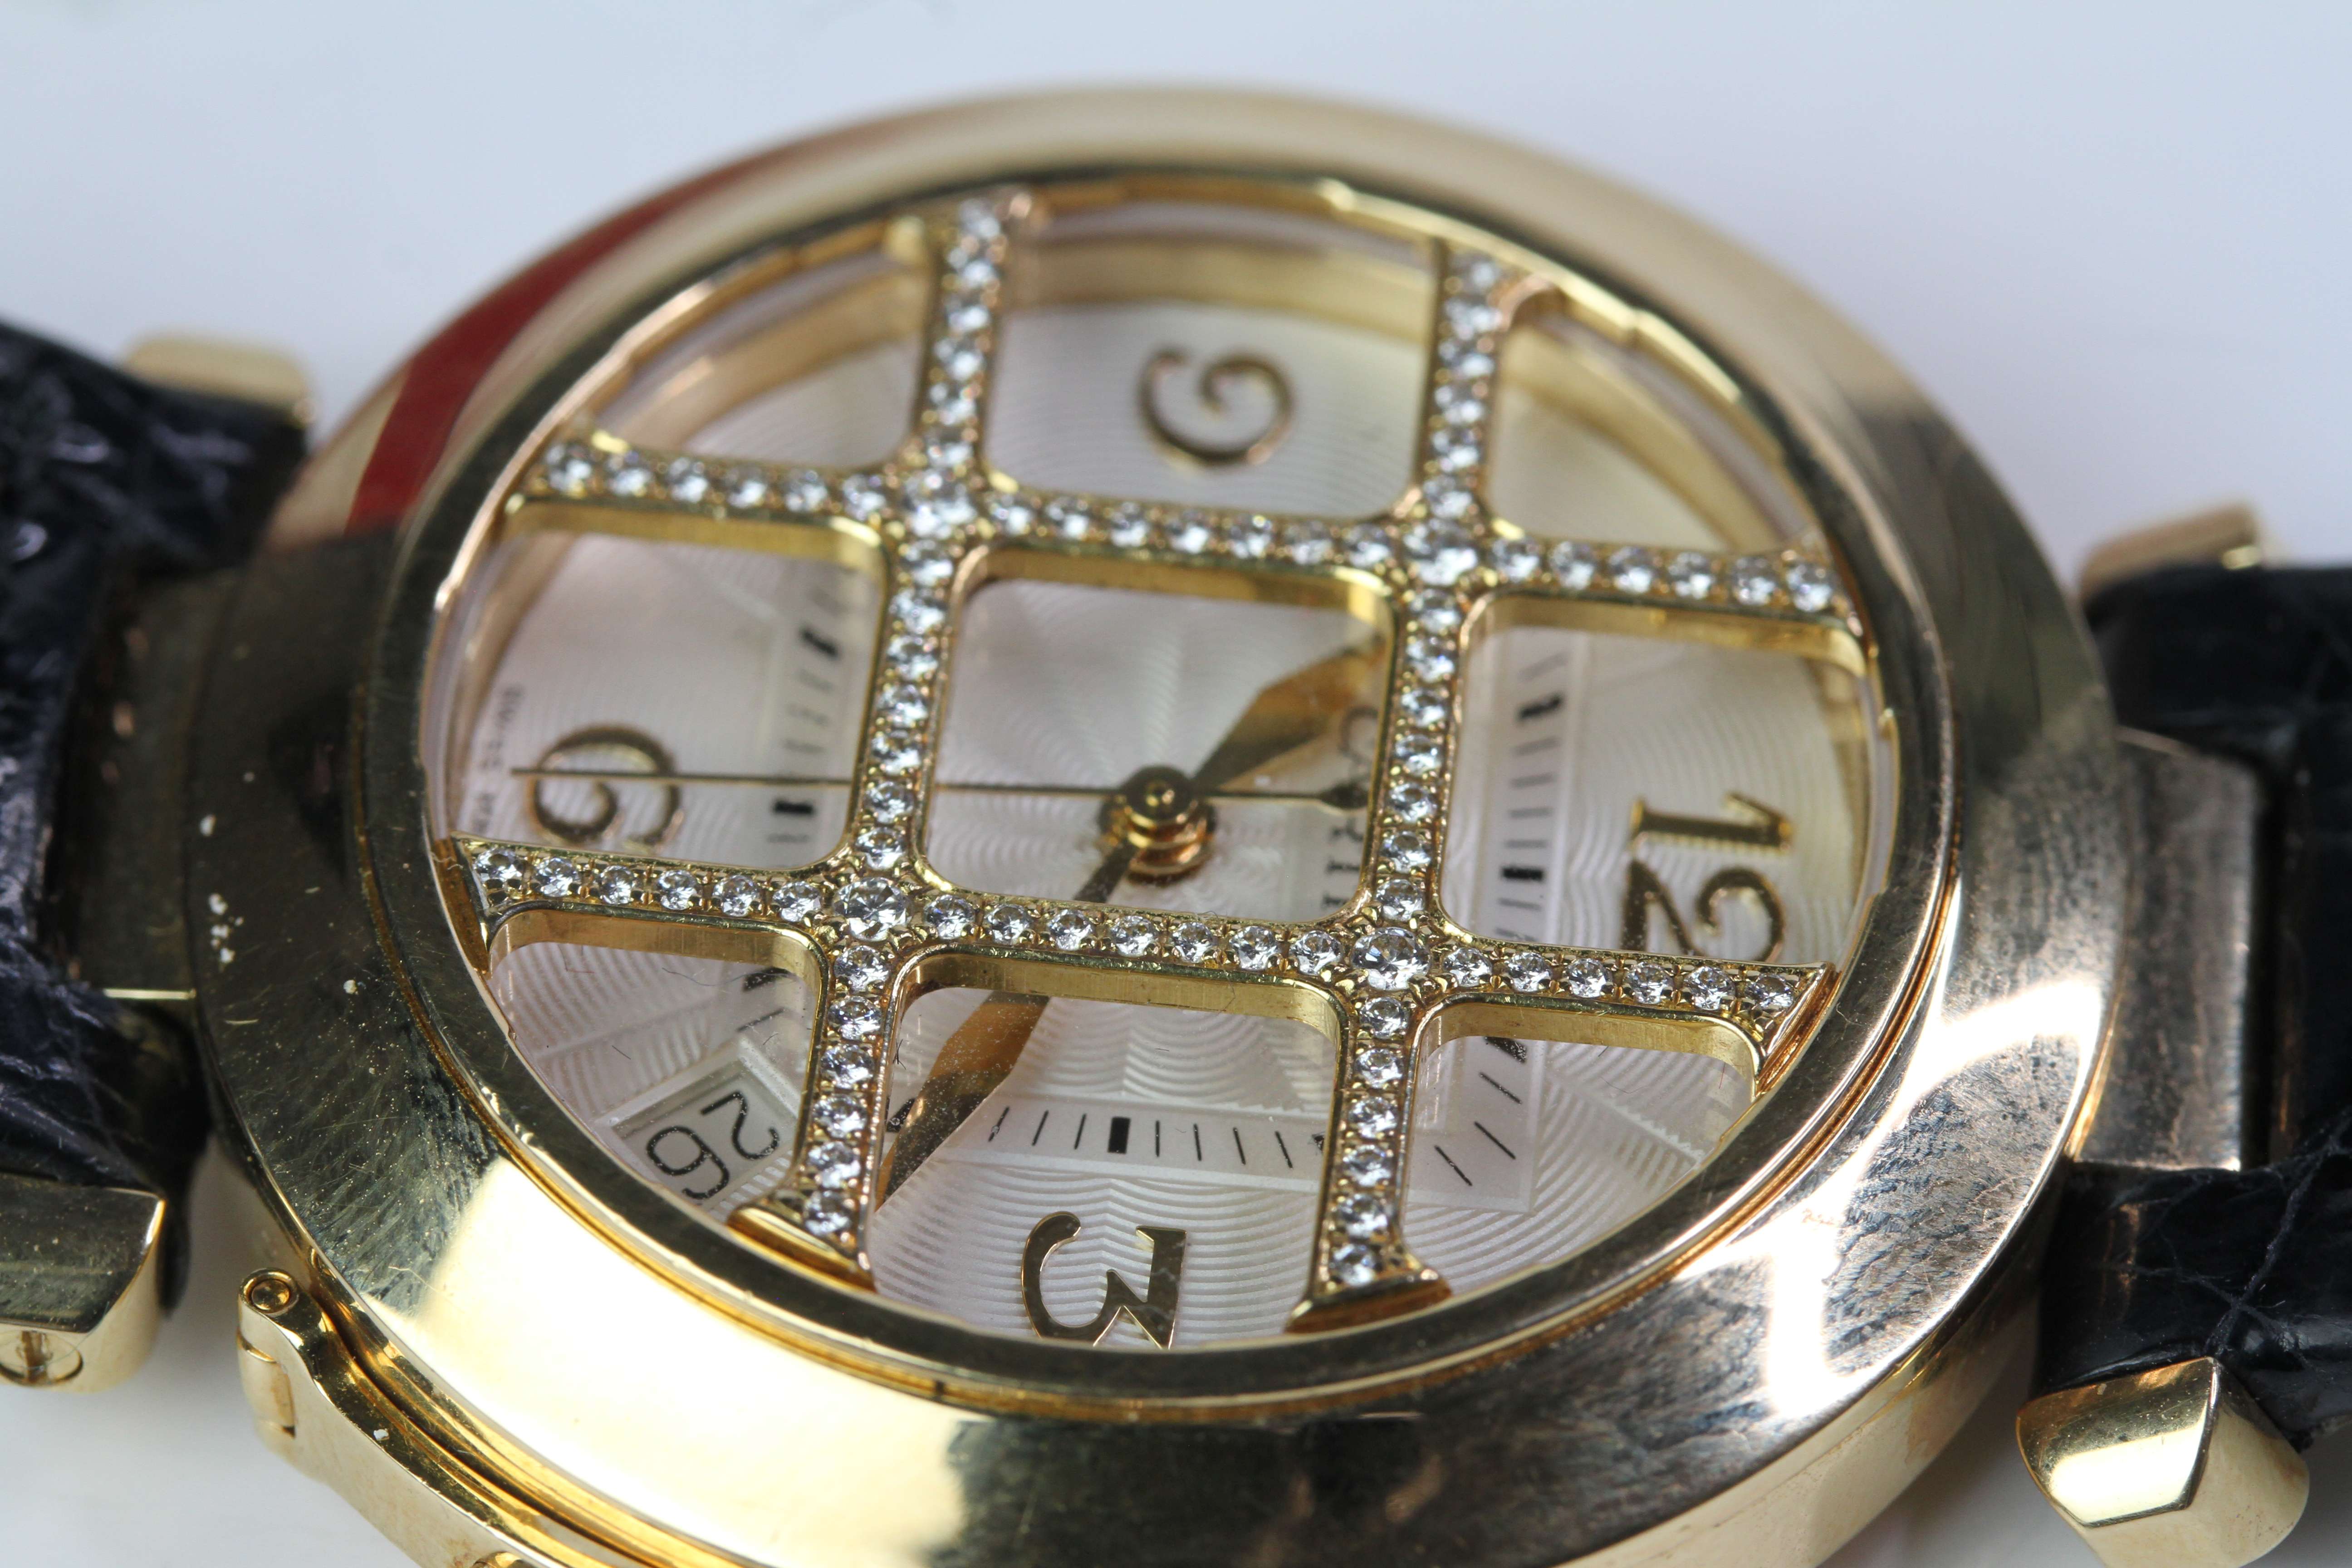 18CT CARTIER PASHA DIAMOND GRILL DIAL WITH BOX REFERENCE 2507 - Image 6 of 6